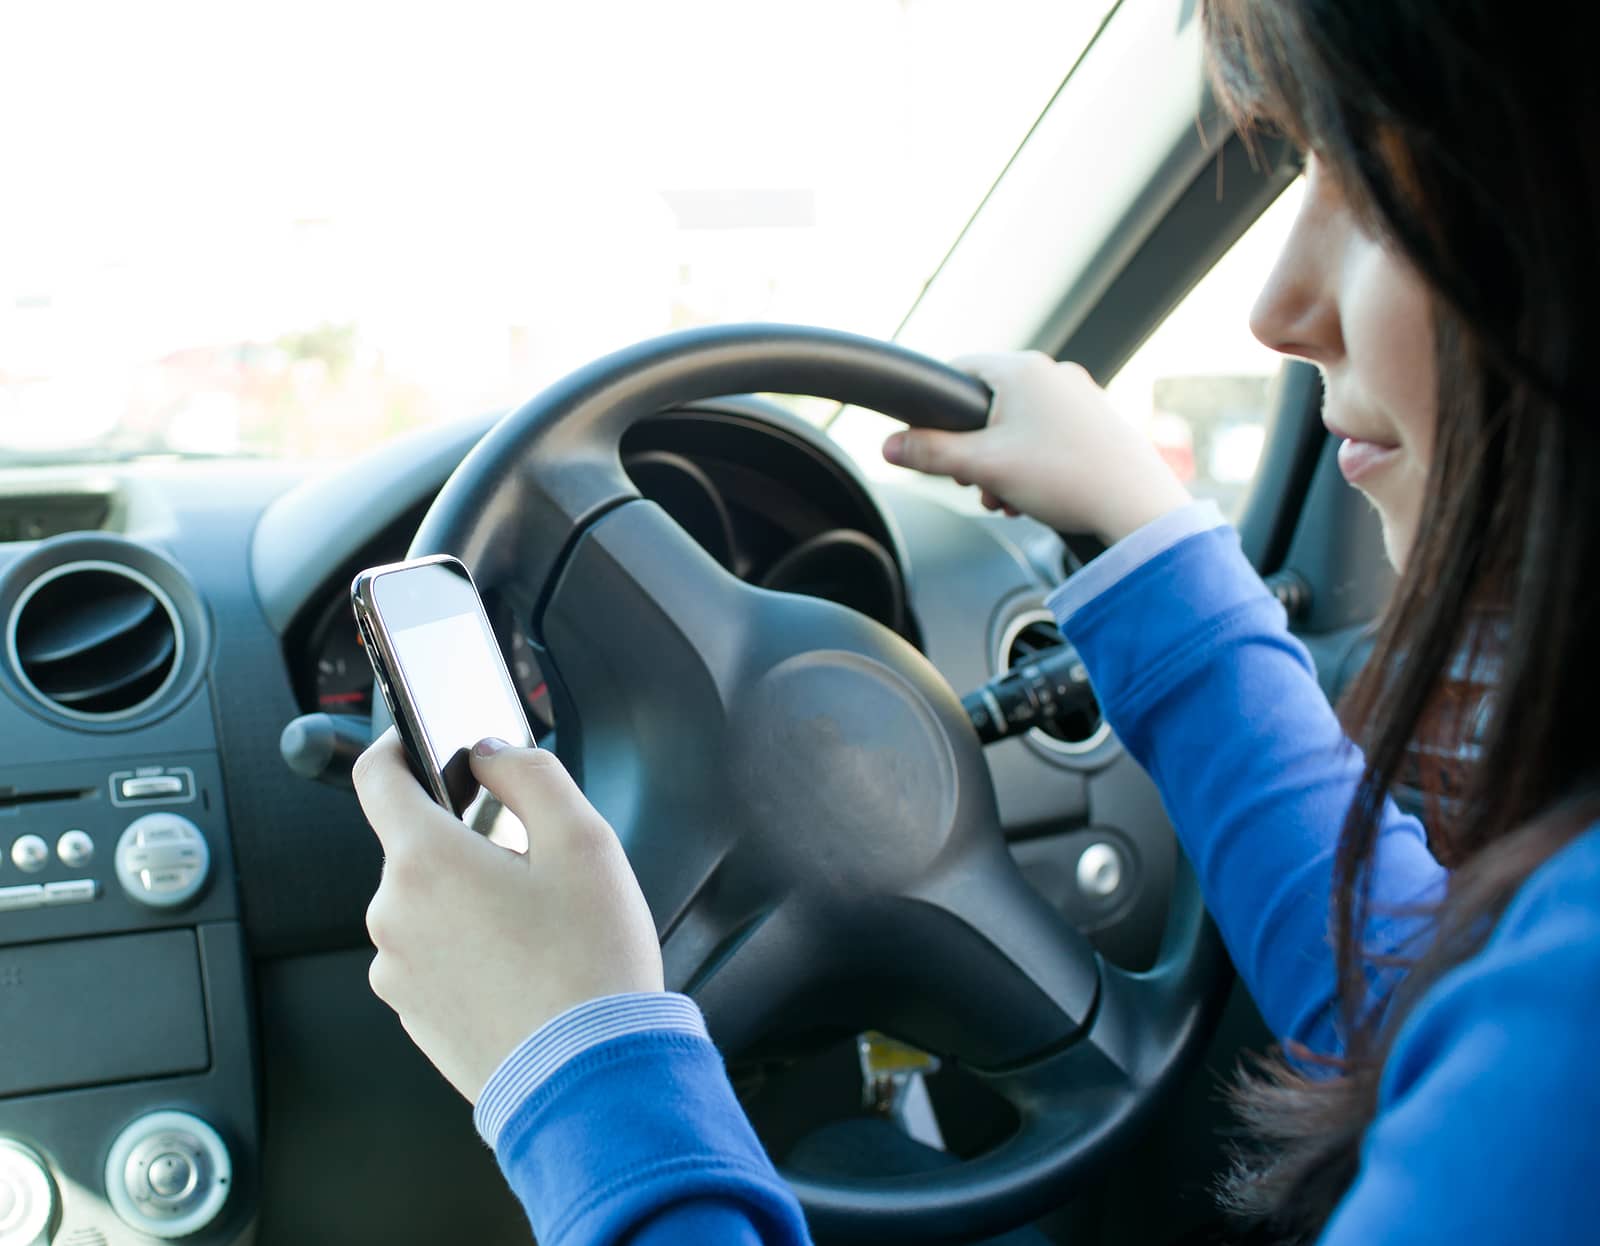 Distracted Driving Safety Tips